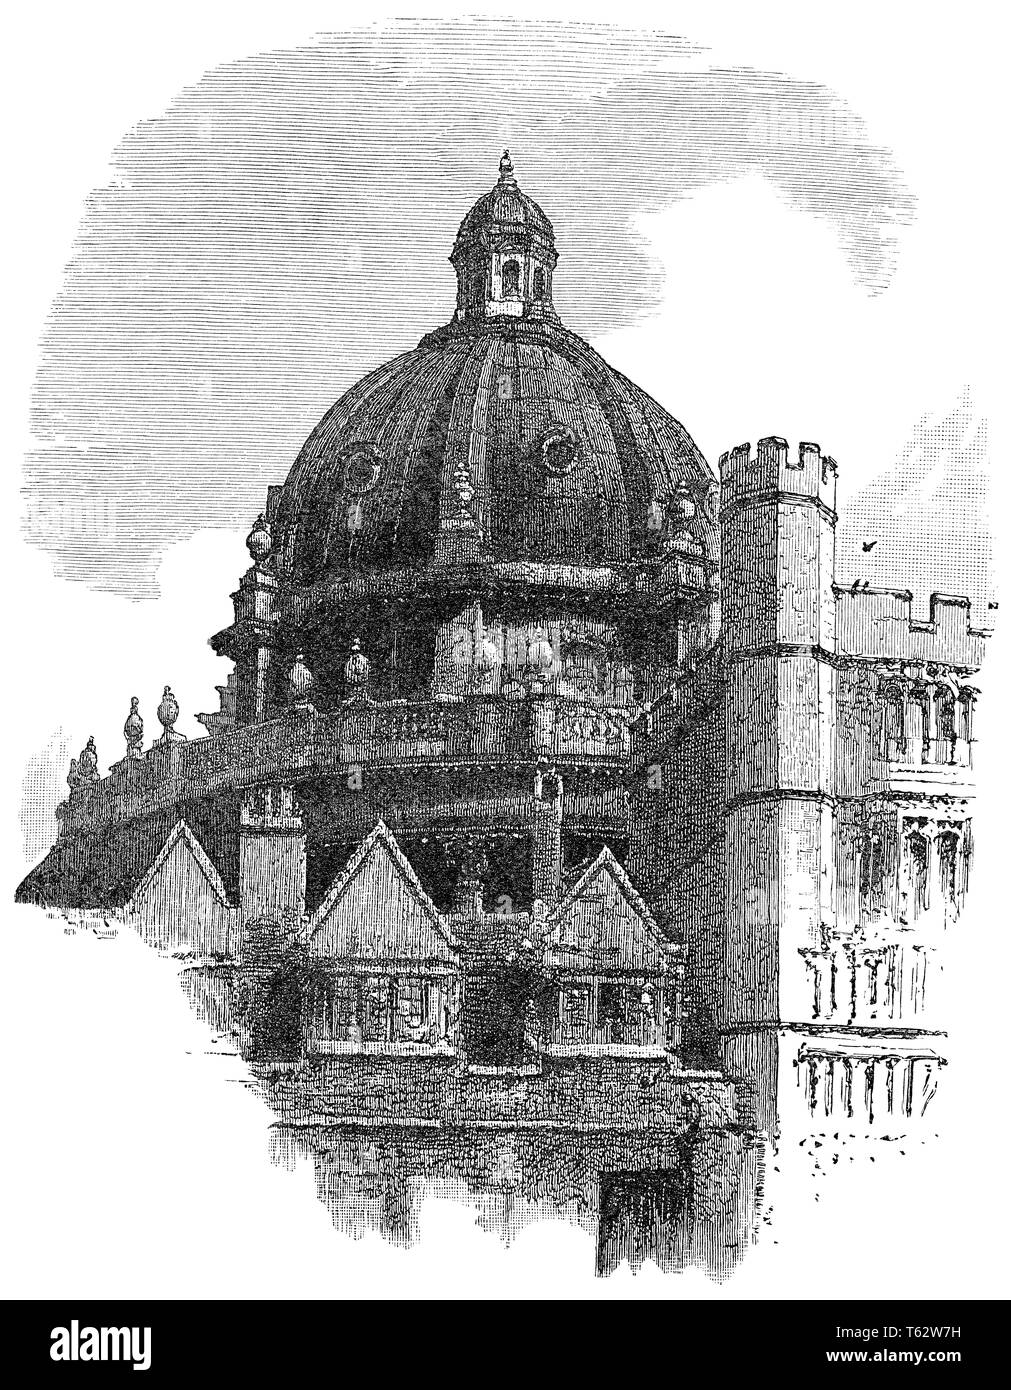 1891 engraving of the dome of the Radcliffe Camera, viewed from Brasenose College, Oxford, Oxfordshire, England. Stock Photo